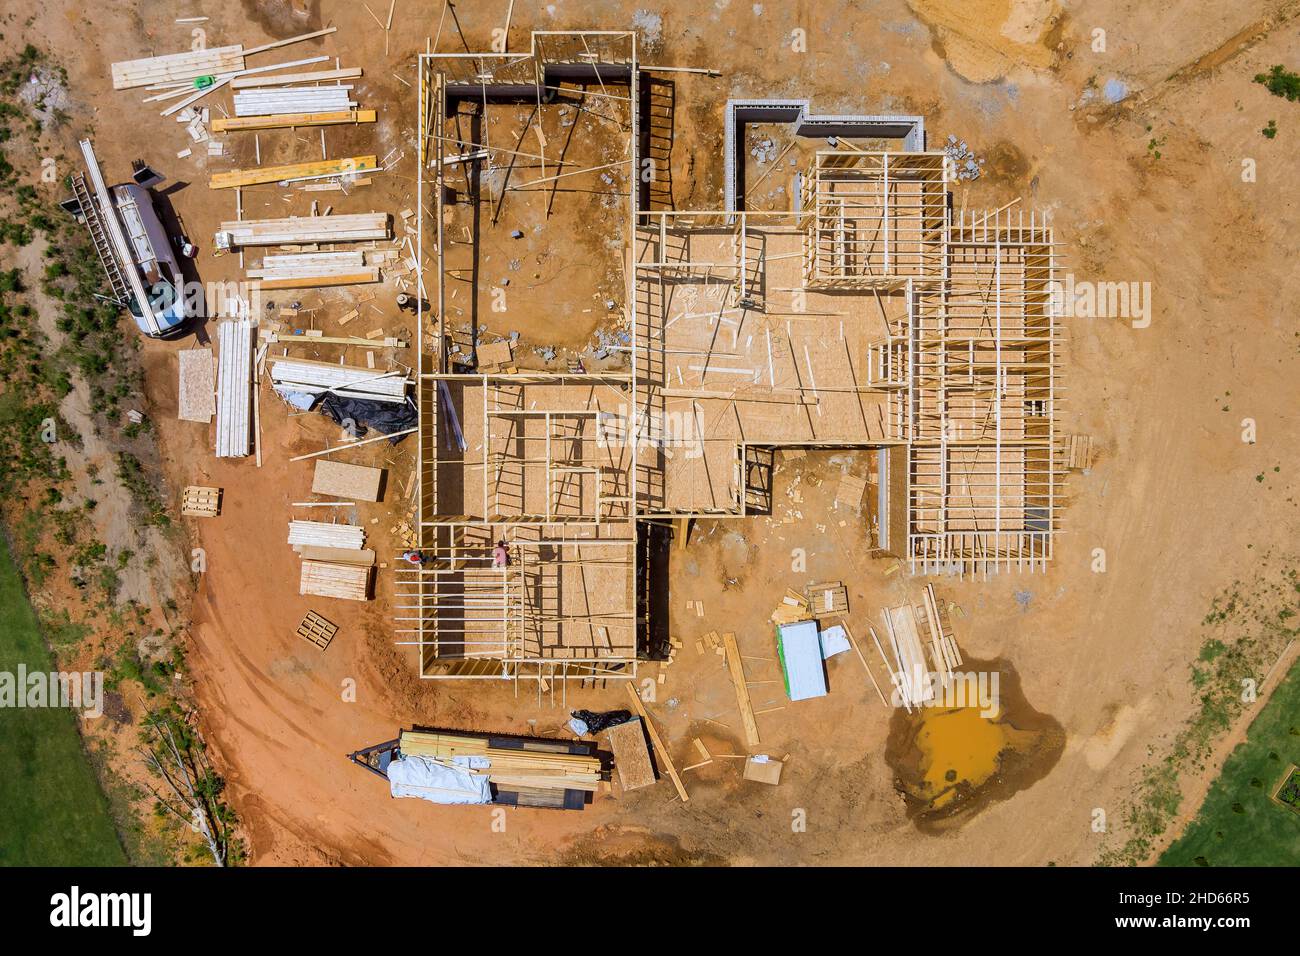 Aerial view of fragment a new home under construction wood framing beams framework Stock Photo